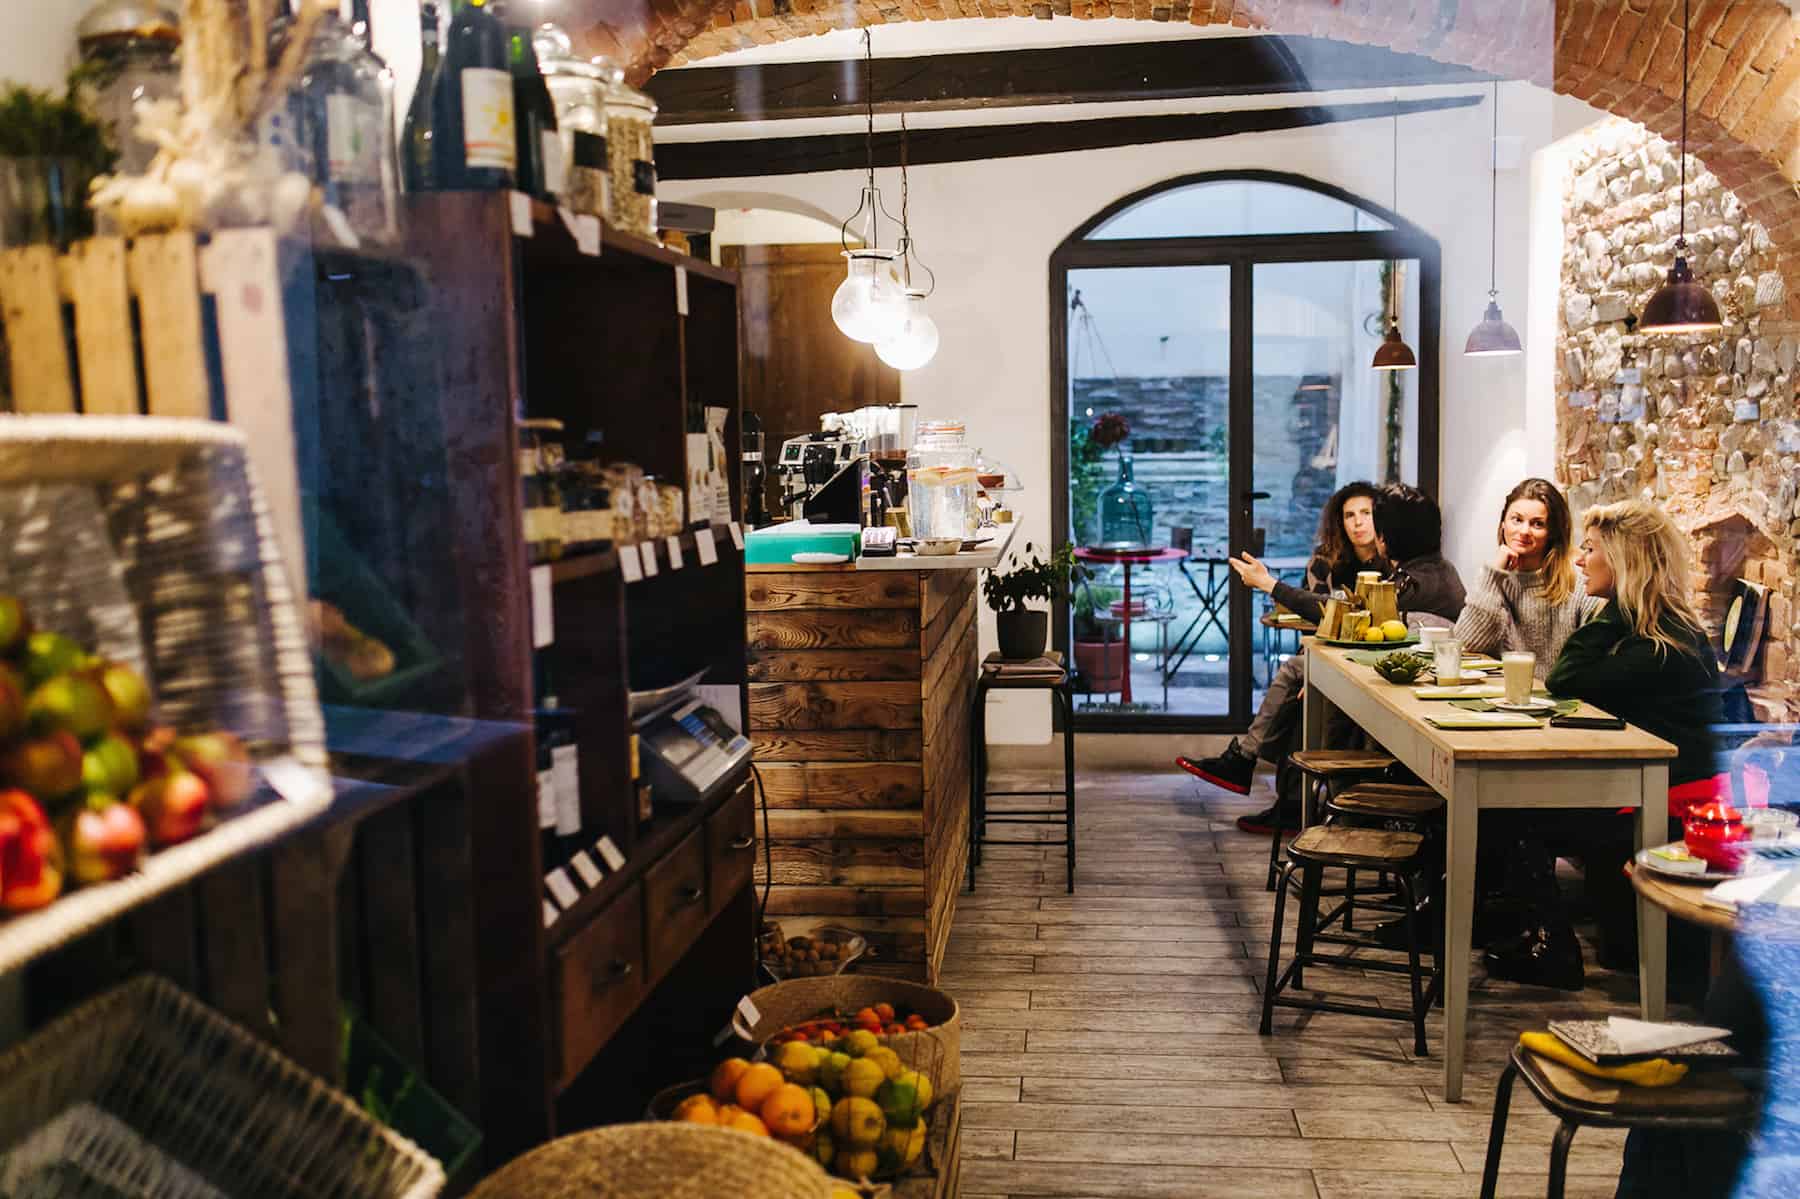 Inside Carduccio organic restaurant in Florence, with its rustic stone interiors.